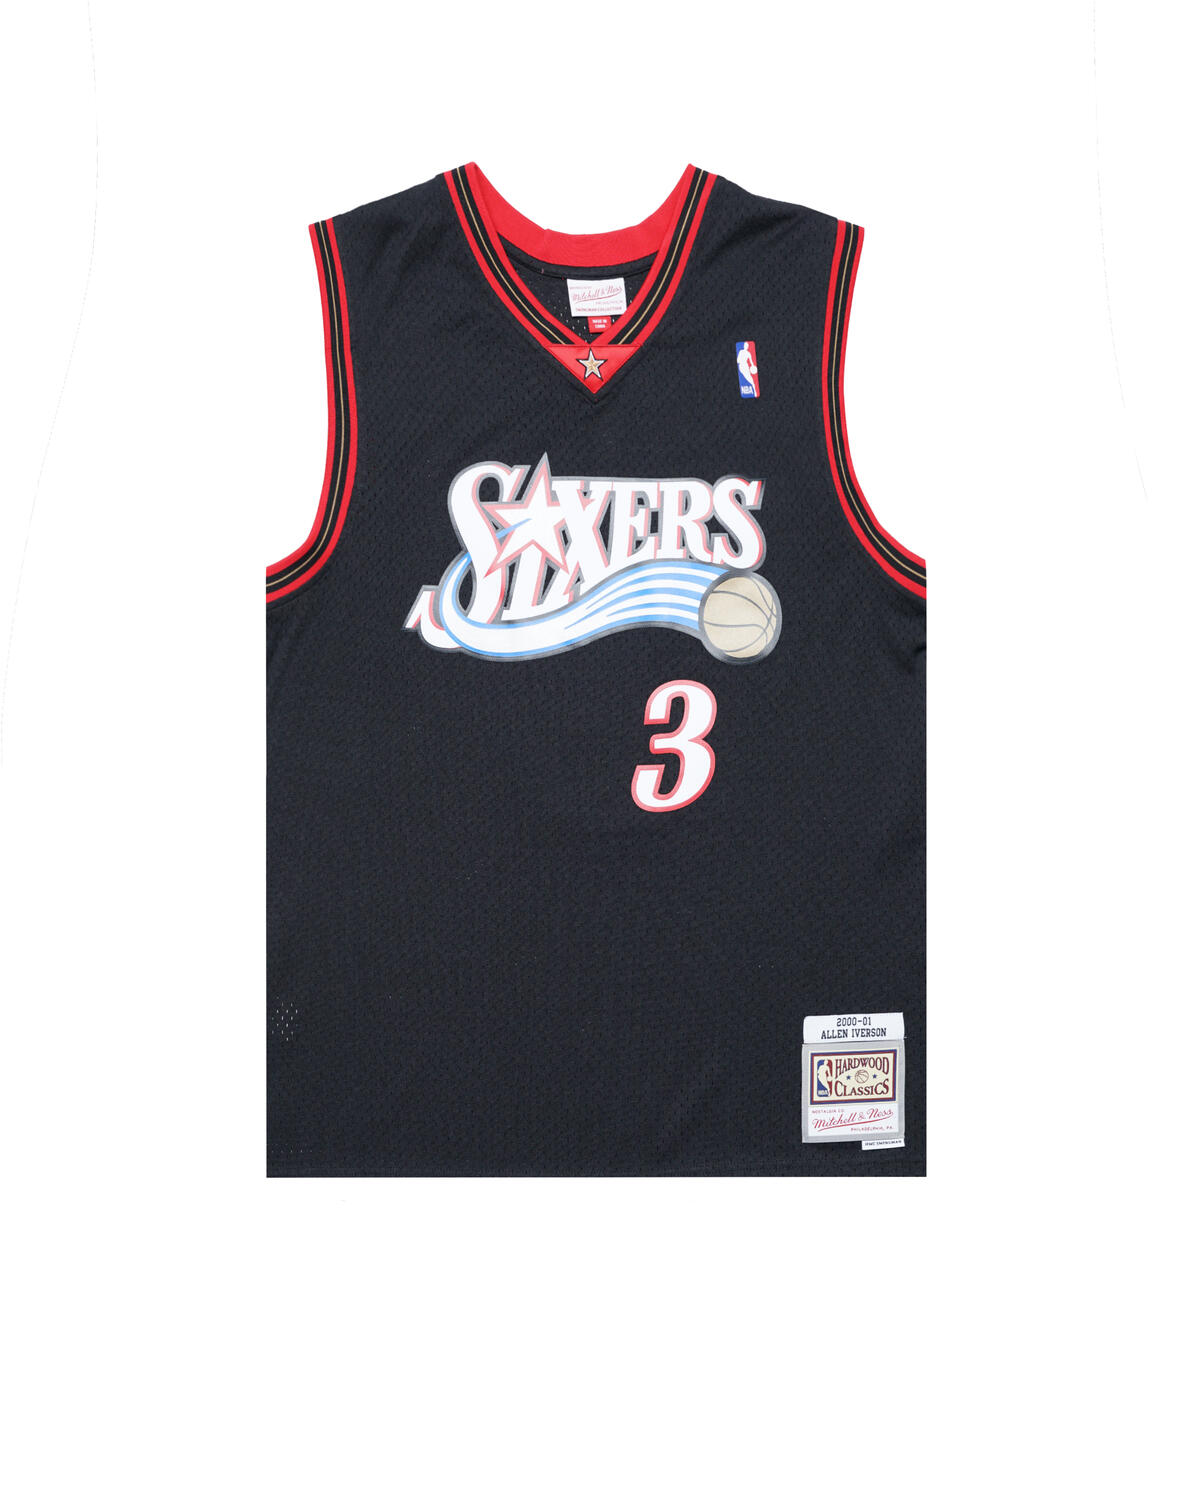 iverson mitchell and ness jersey